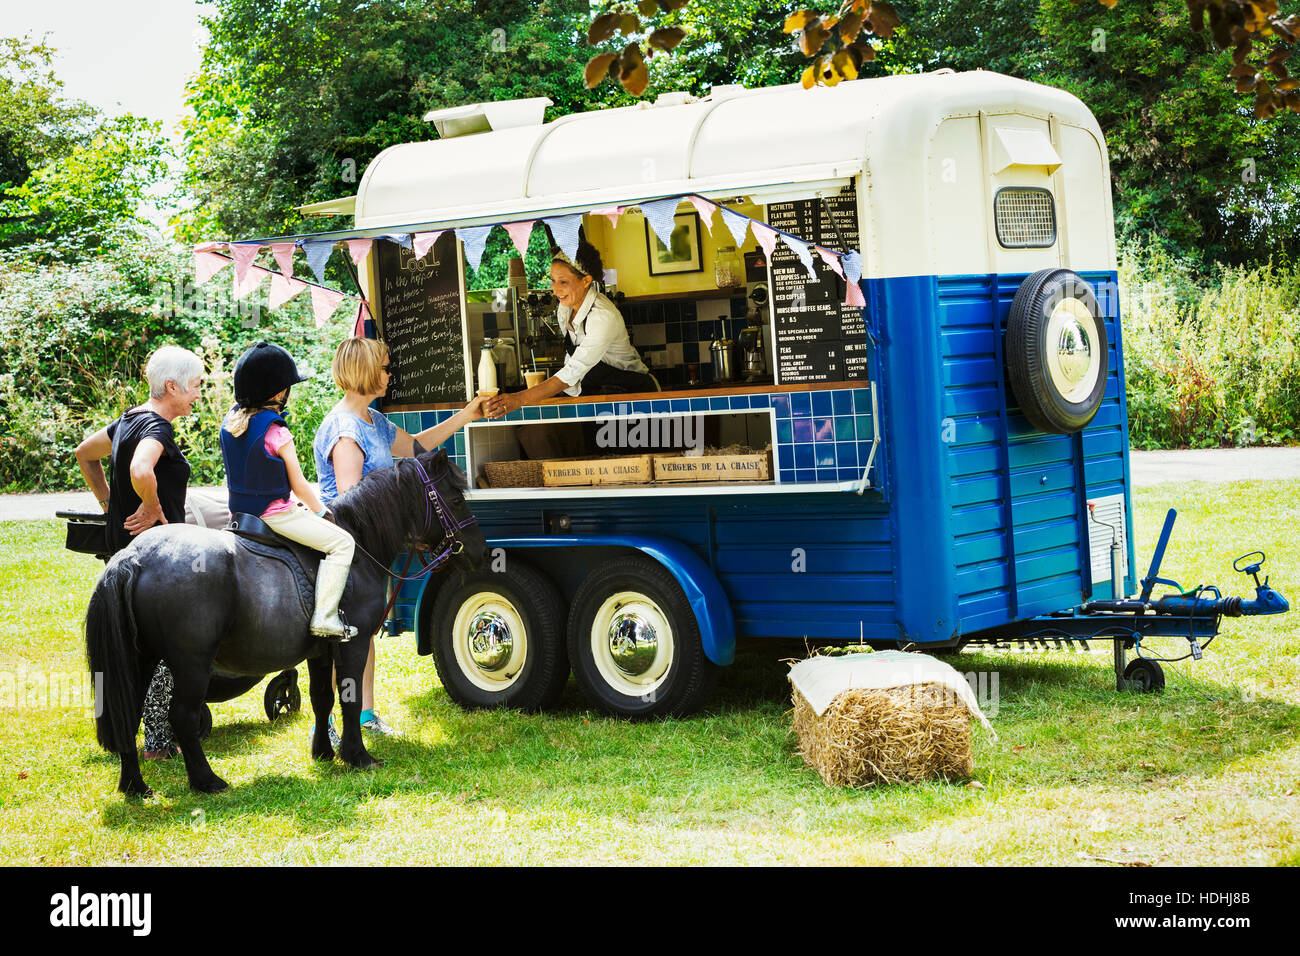 People and girl on pony queueing at a blue mobile coffee shop. Stock Photo